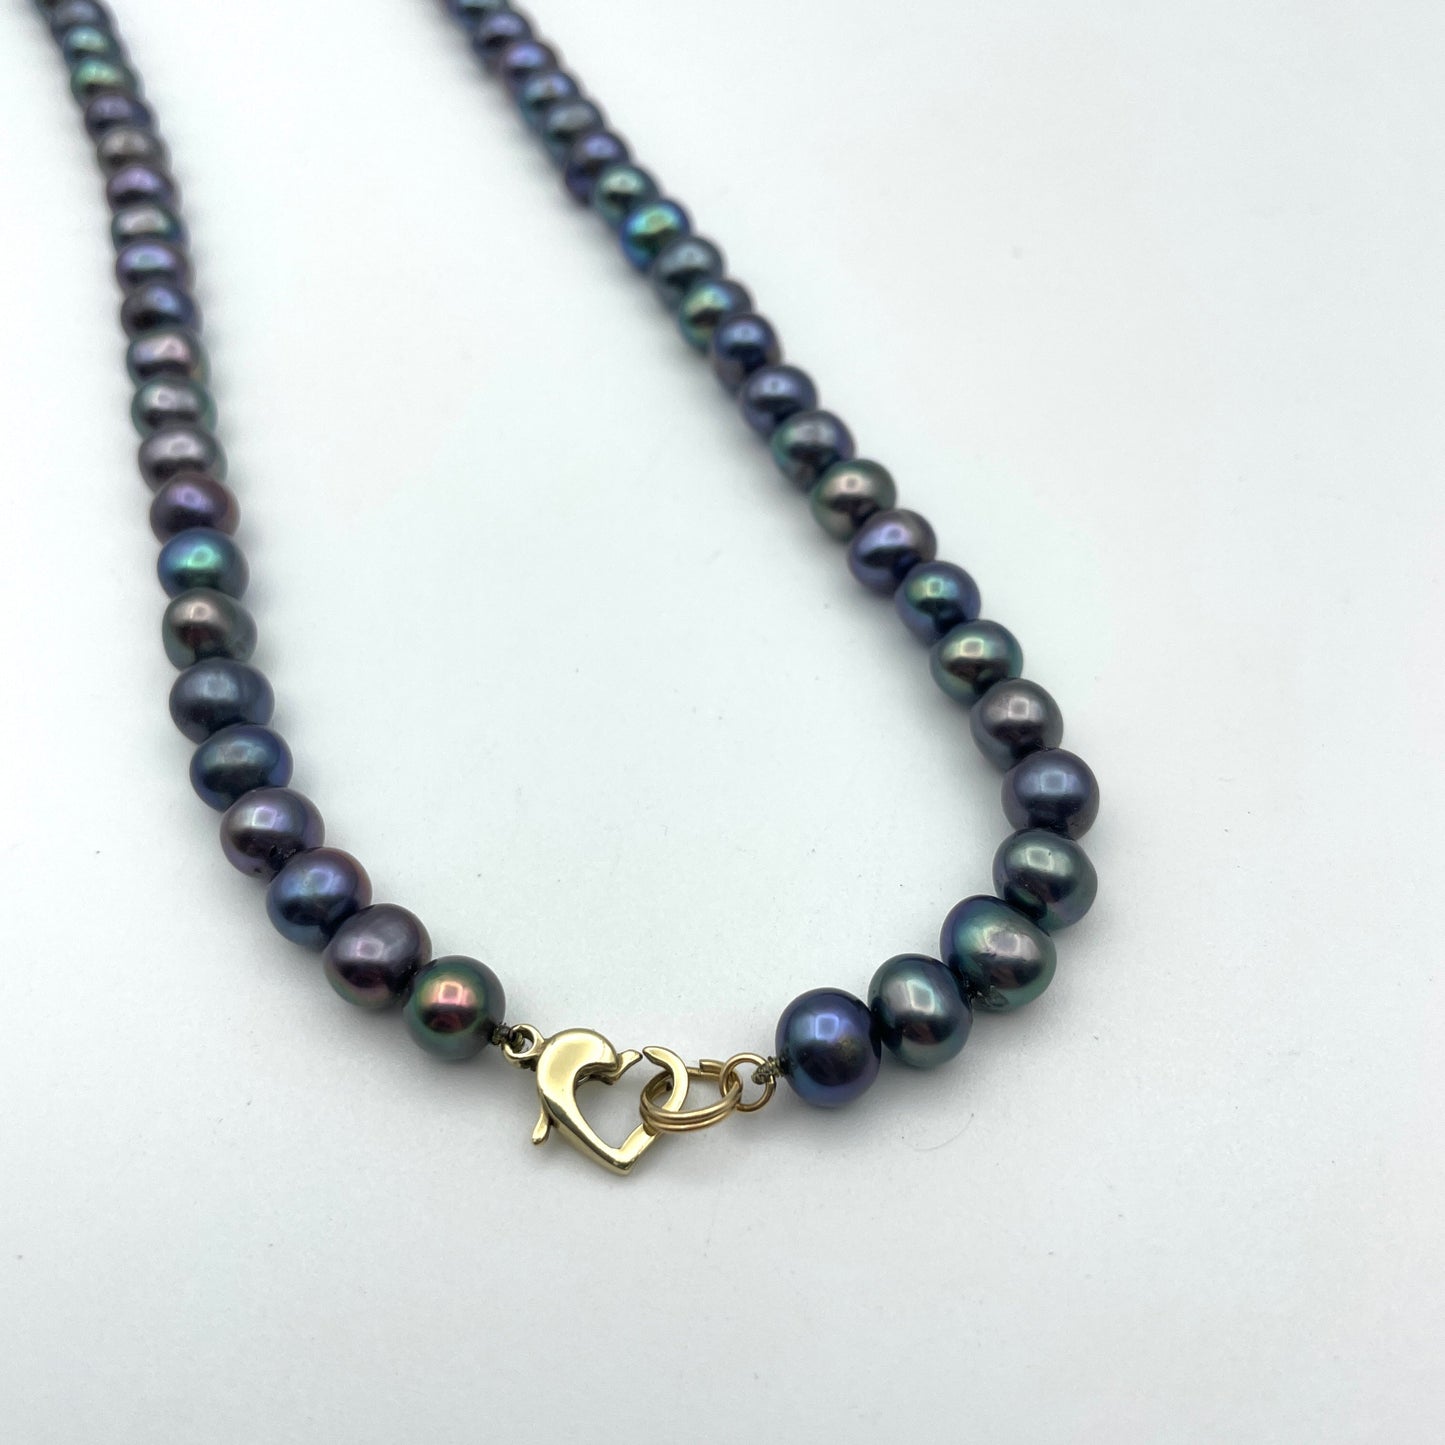 Beautiful Dark Pearl Necklace with 14k Gold Heart Clasp